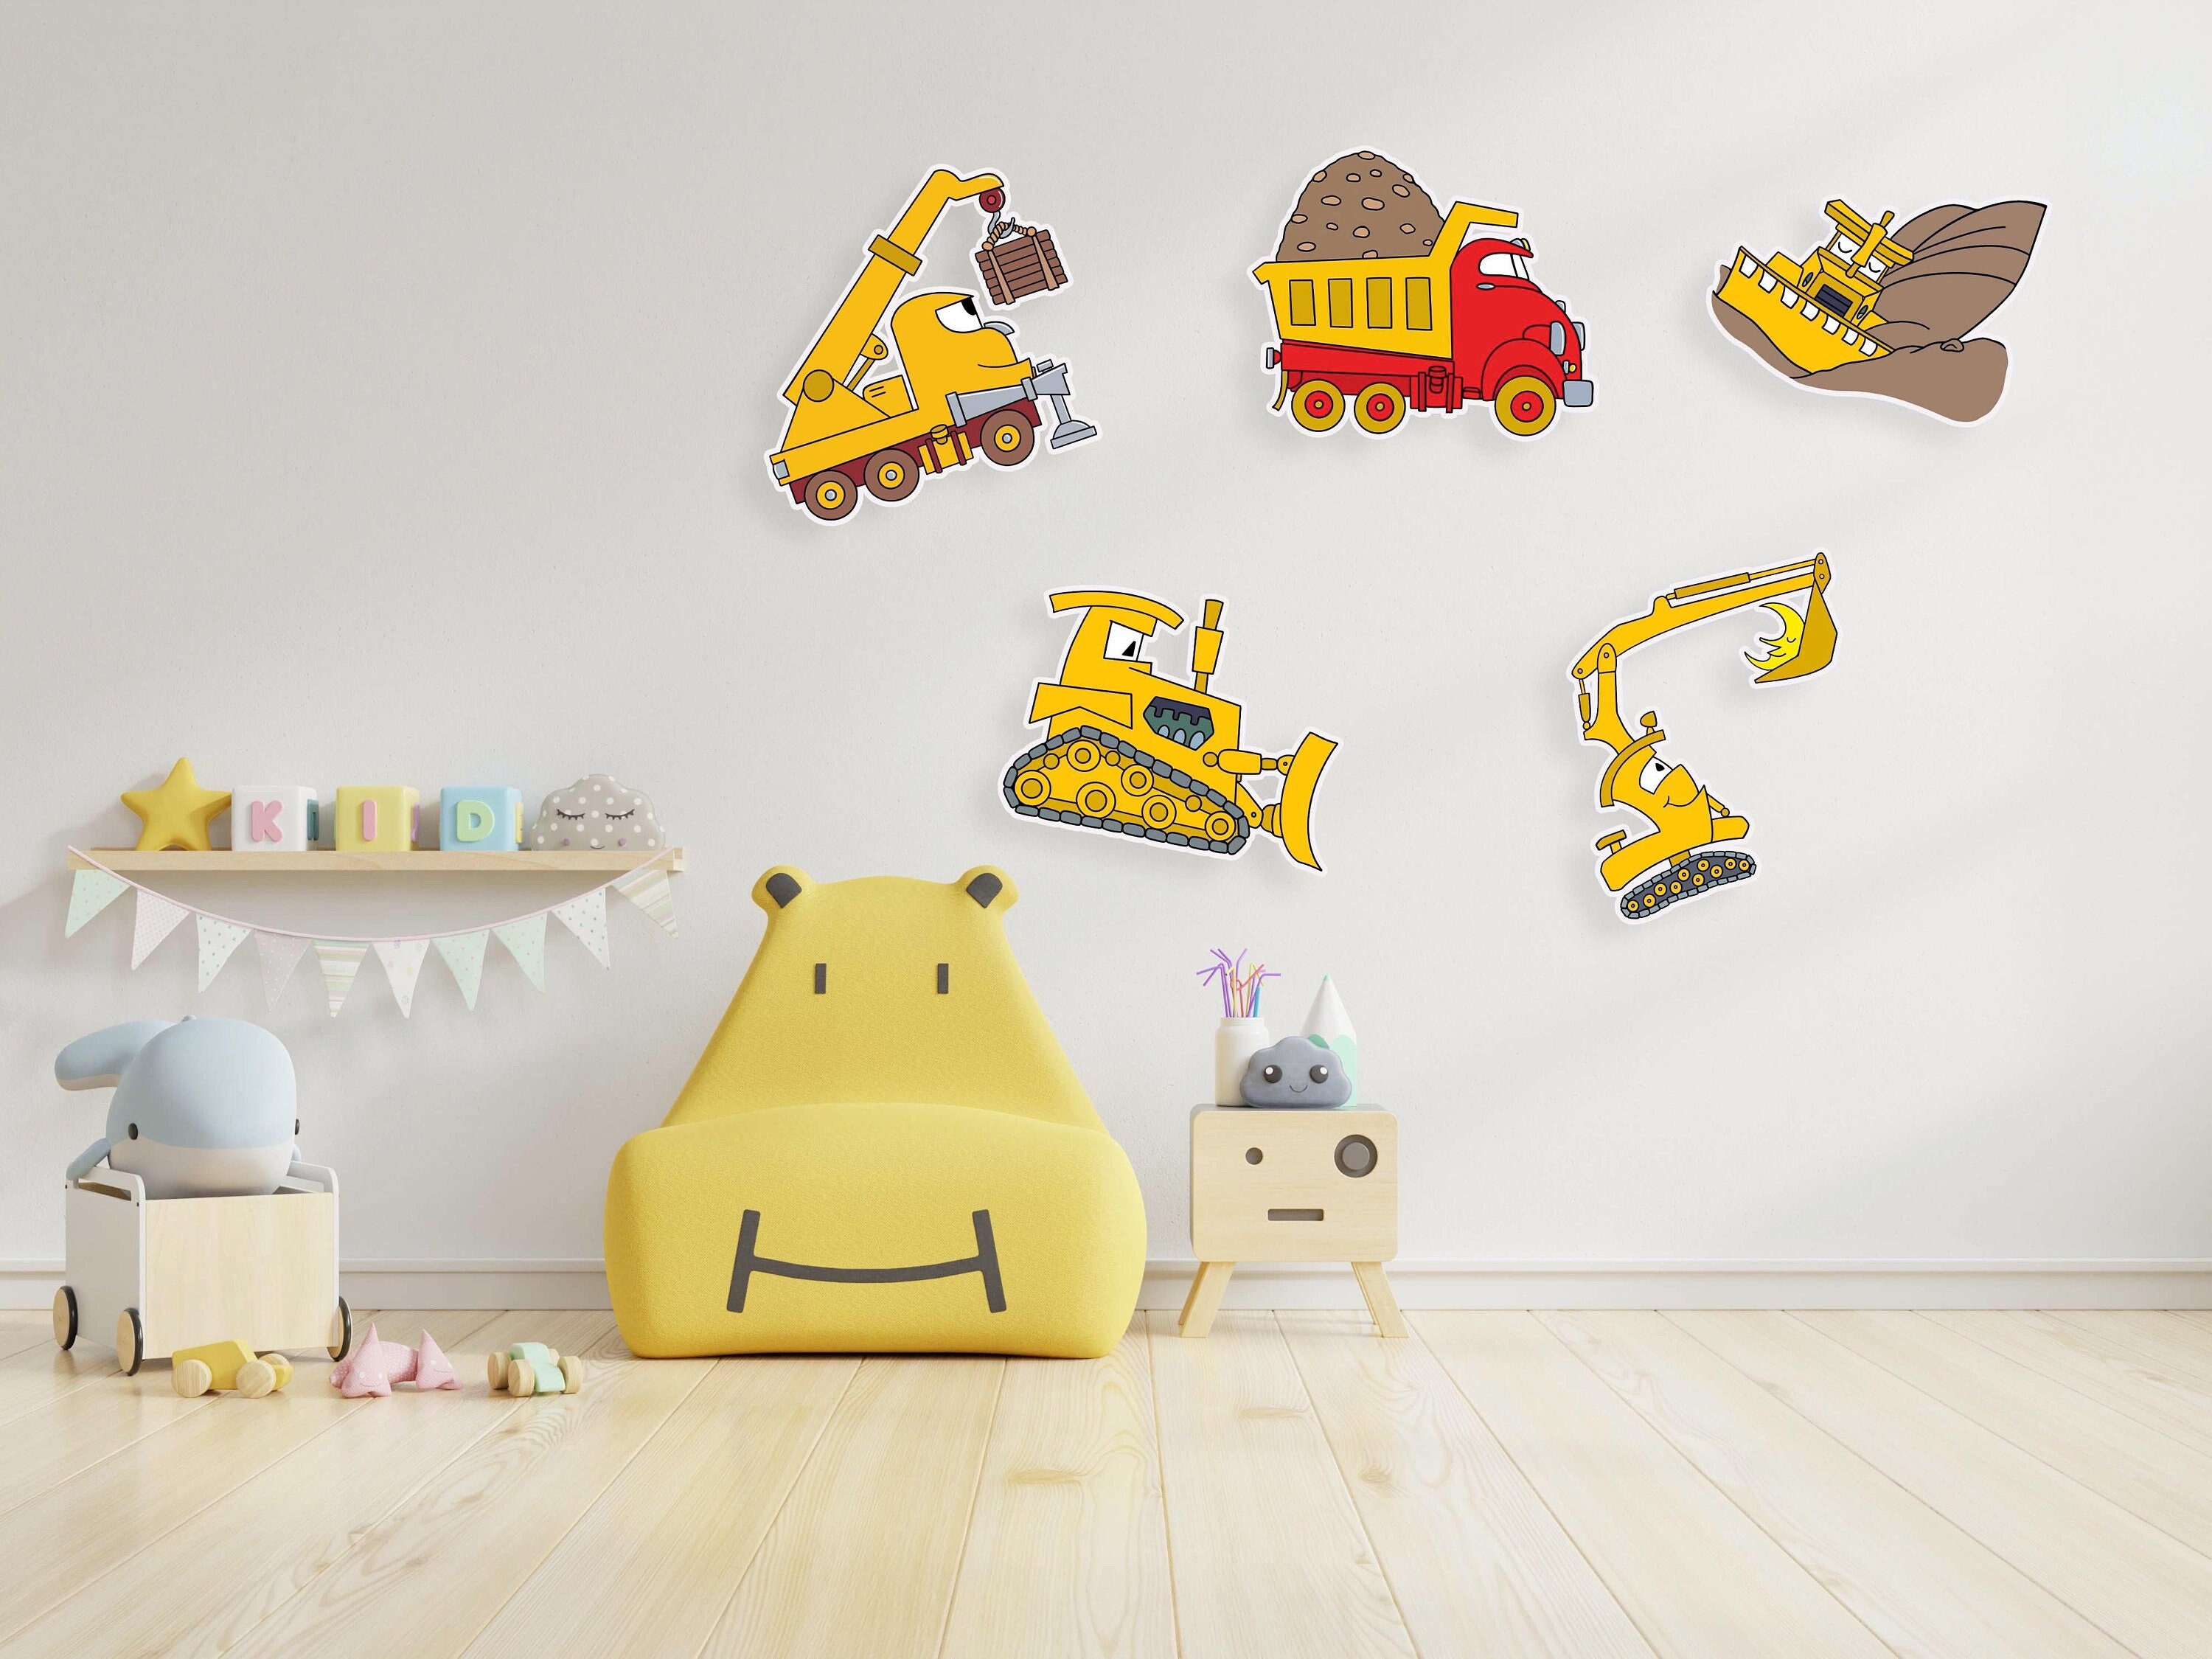 Buy 5 Pcs Book Goodnight Wall Stickers for Kids Room or Birthday Online in  India - Etsy